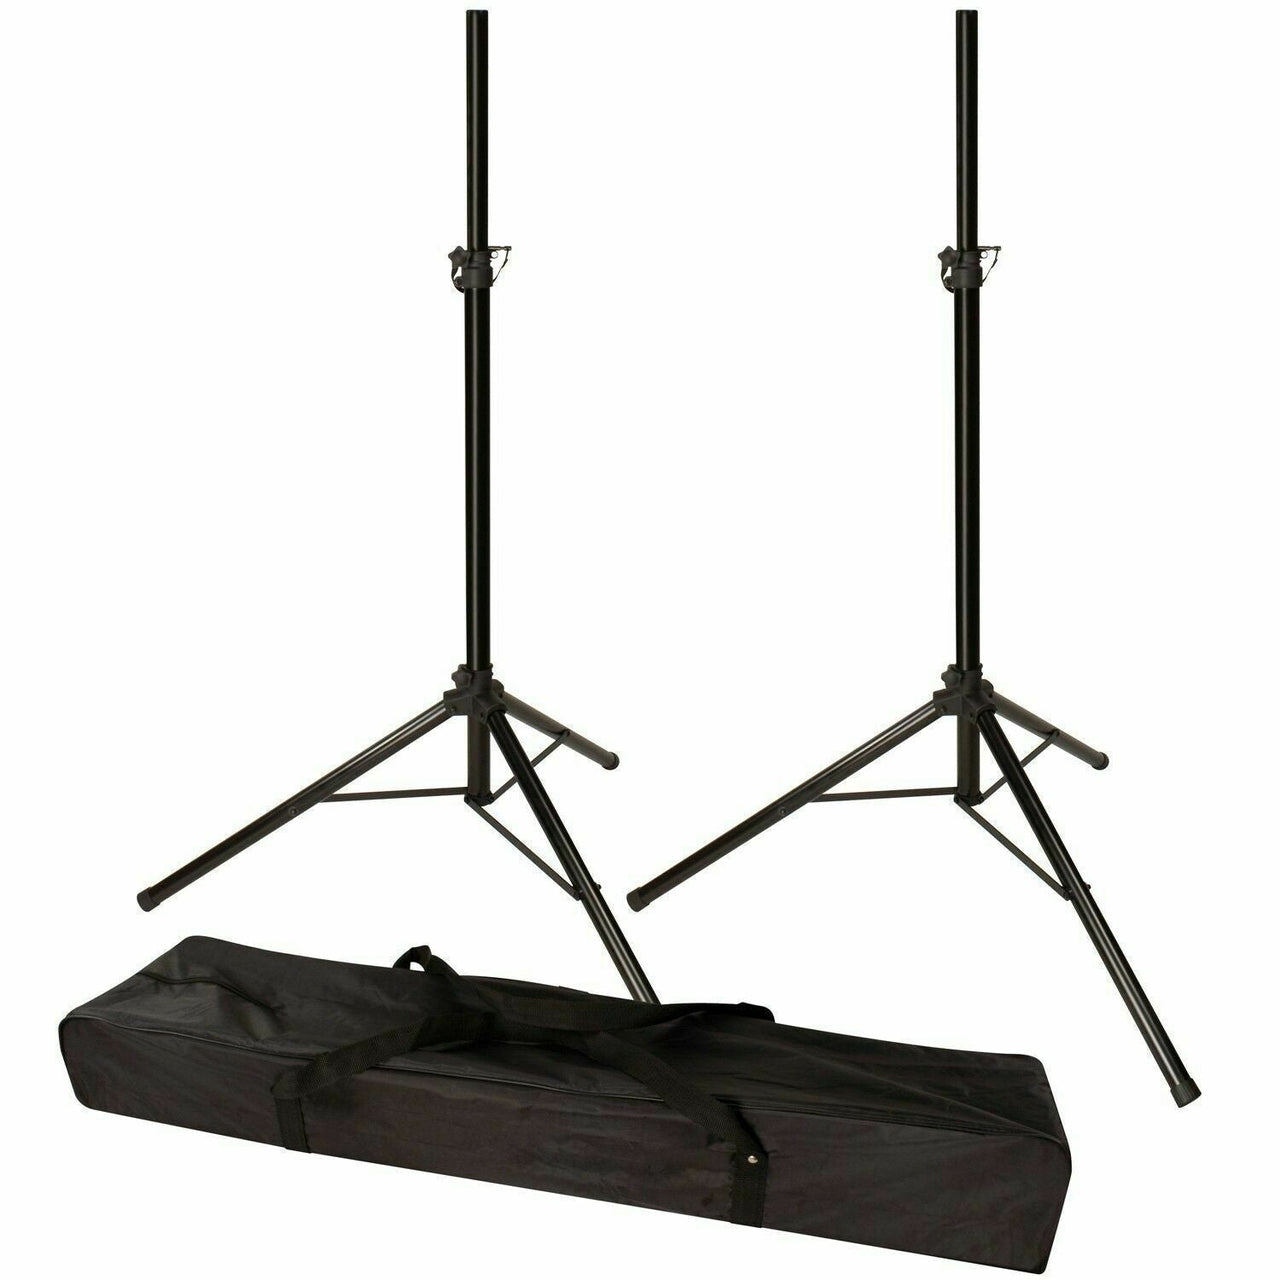 2 MR DJ SS350B Universal Black Heavy Duty Folding Tripod PRO PA DJ Home On Stage Speaker Stand Mount Holder with Road Carrying Bag